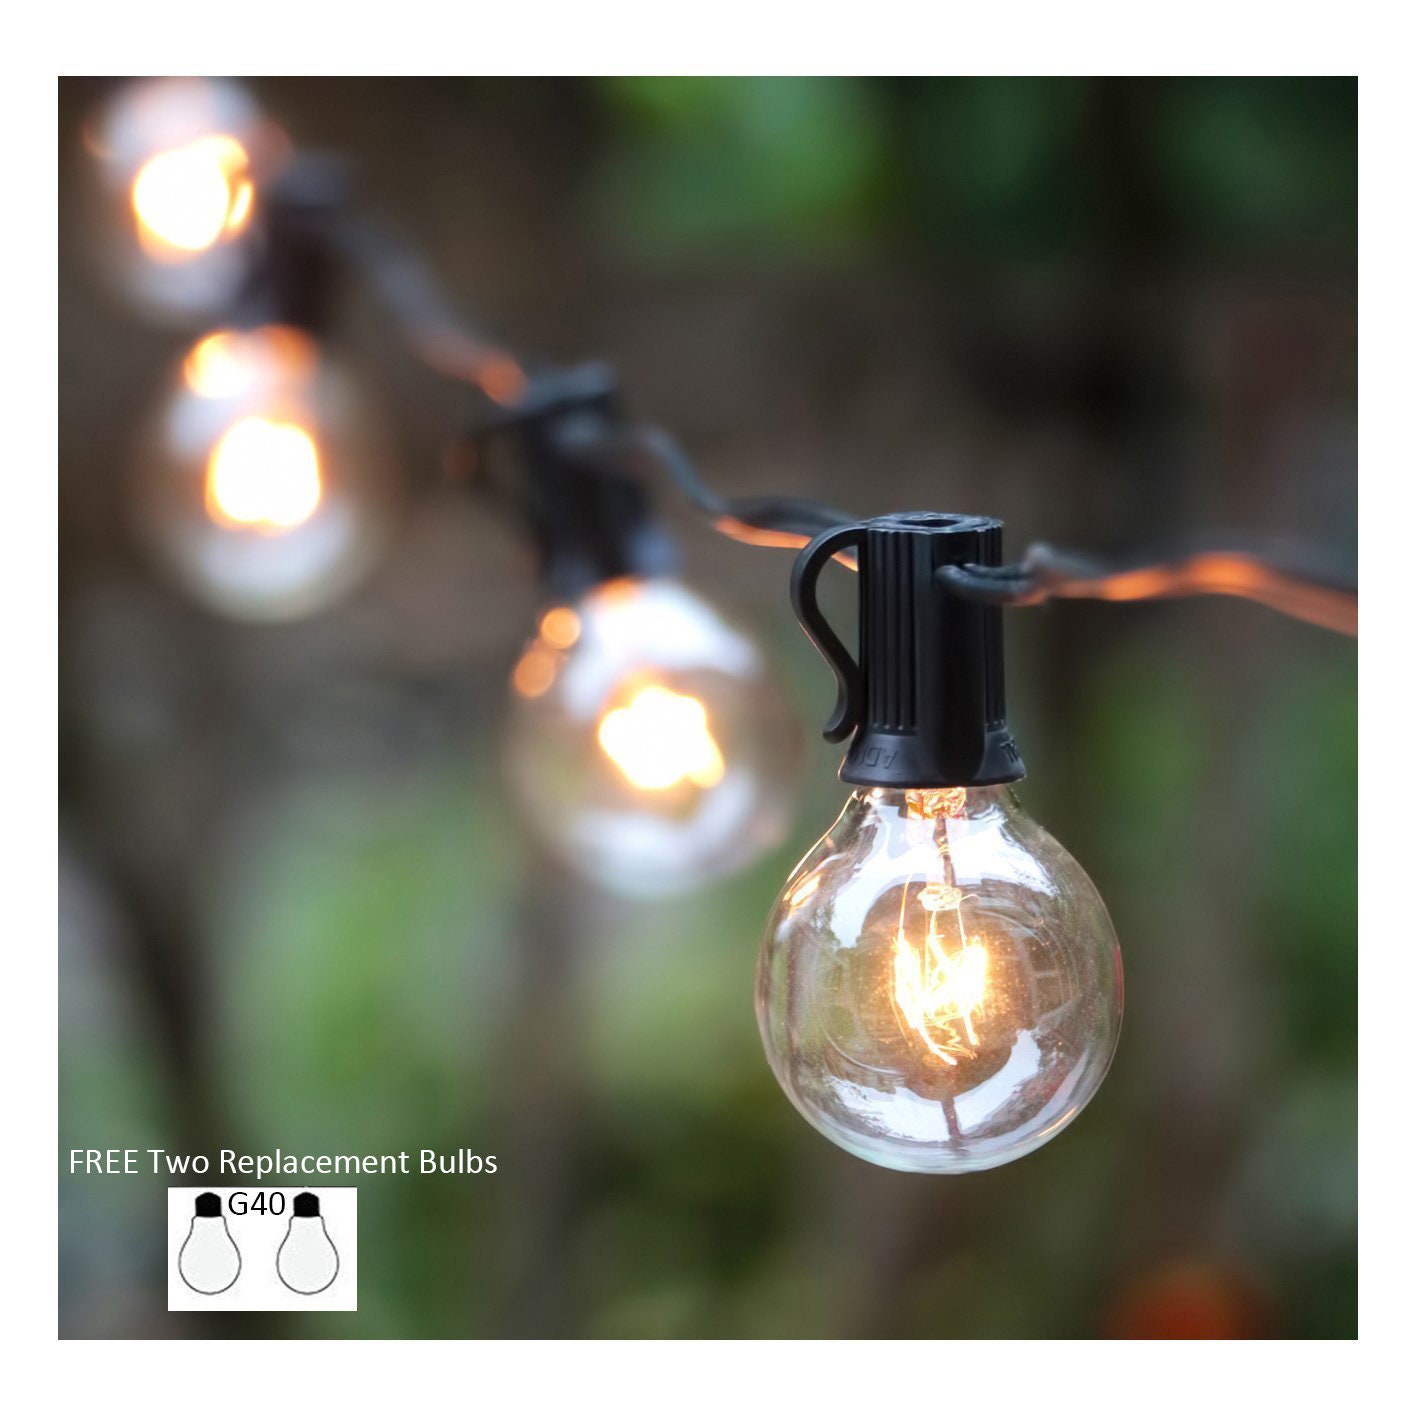 2 Spare G40 Globe Patio Lights 25Ft Outdoor String Lights with 27 Edison Glass Bulbs Waterproof Connectable Hanging Light E12 Base for Backyard Porch Balcony Party Decor